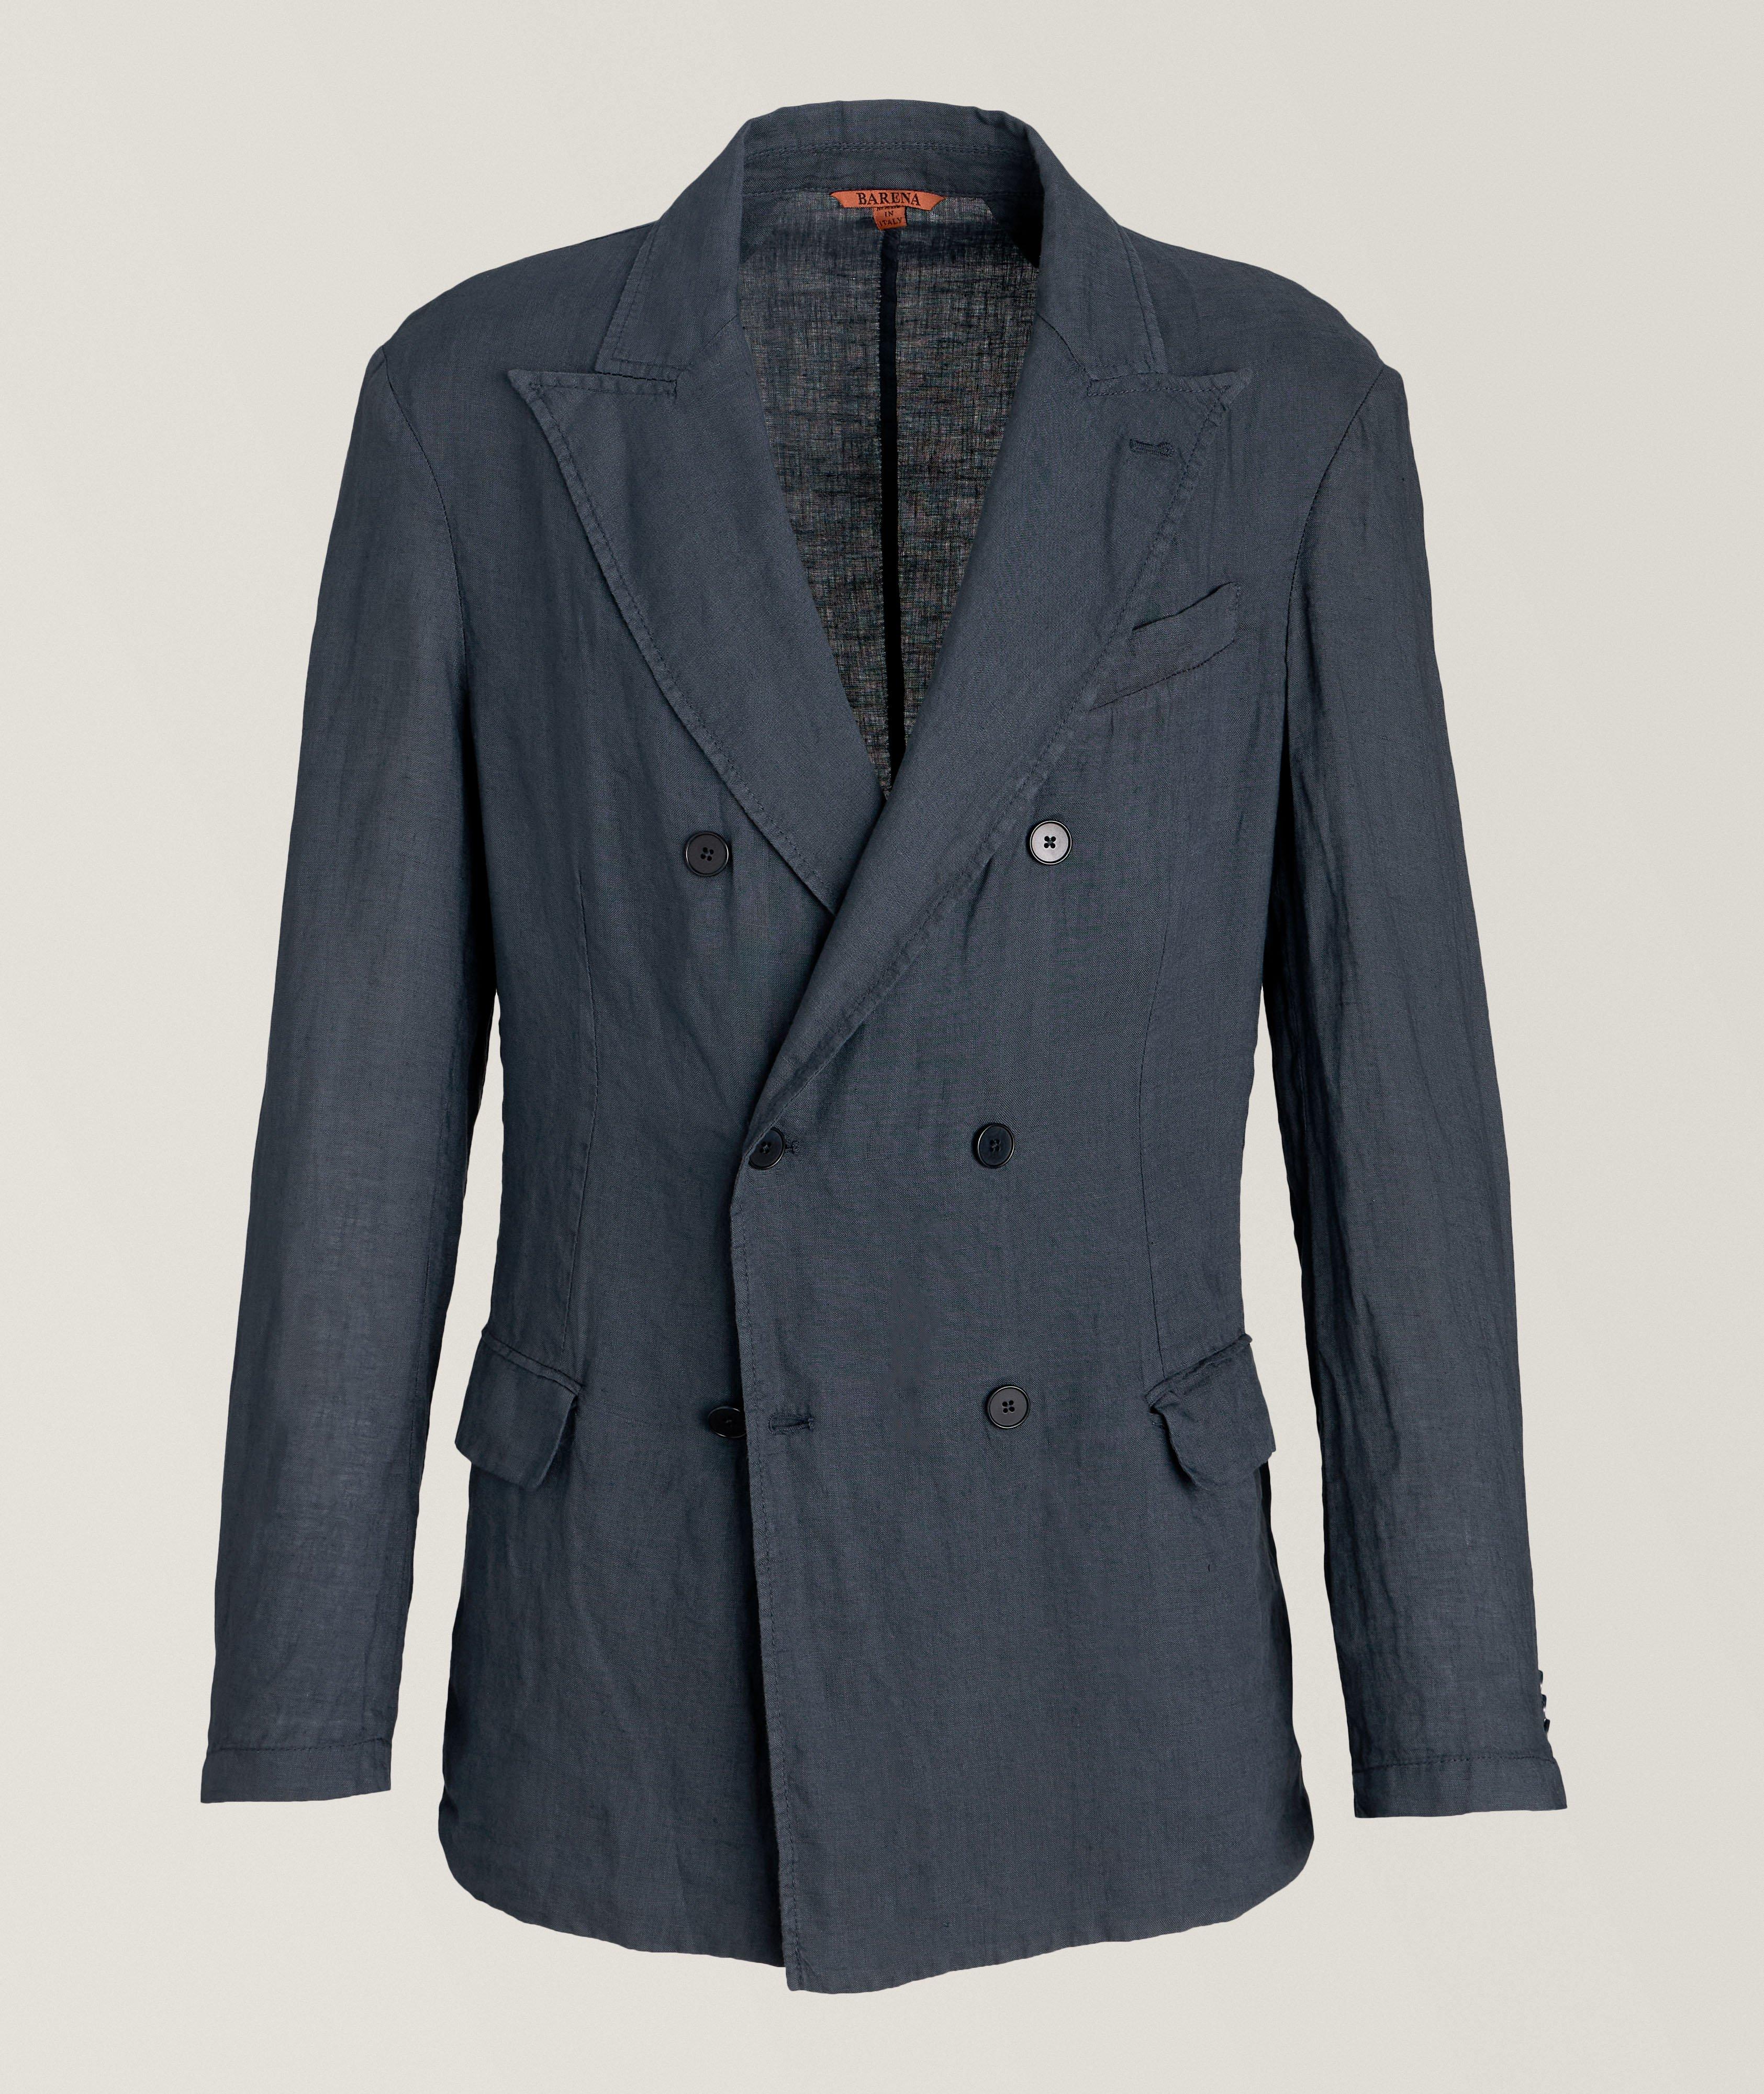 Double-Breasted Linen Sport Jacket image 0